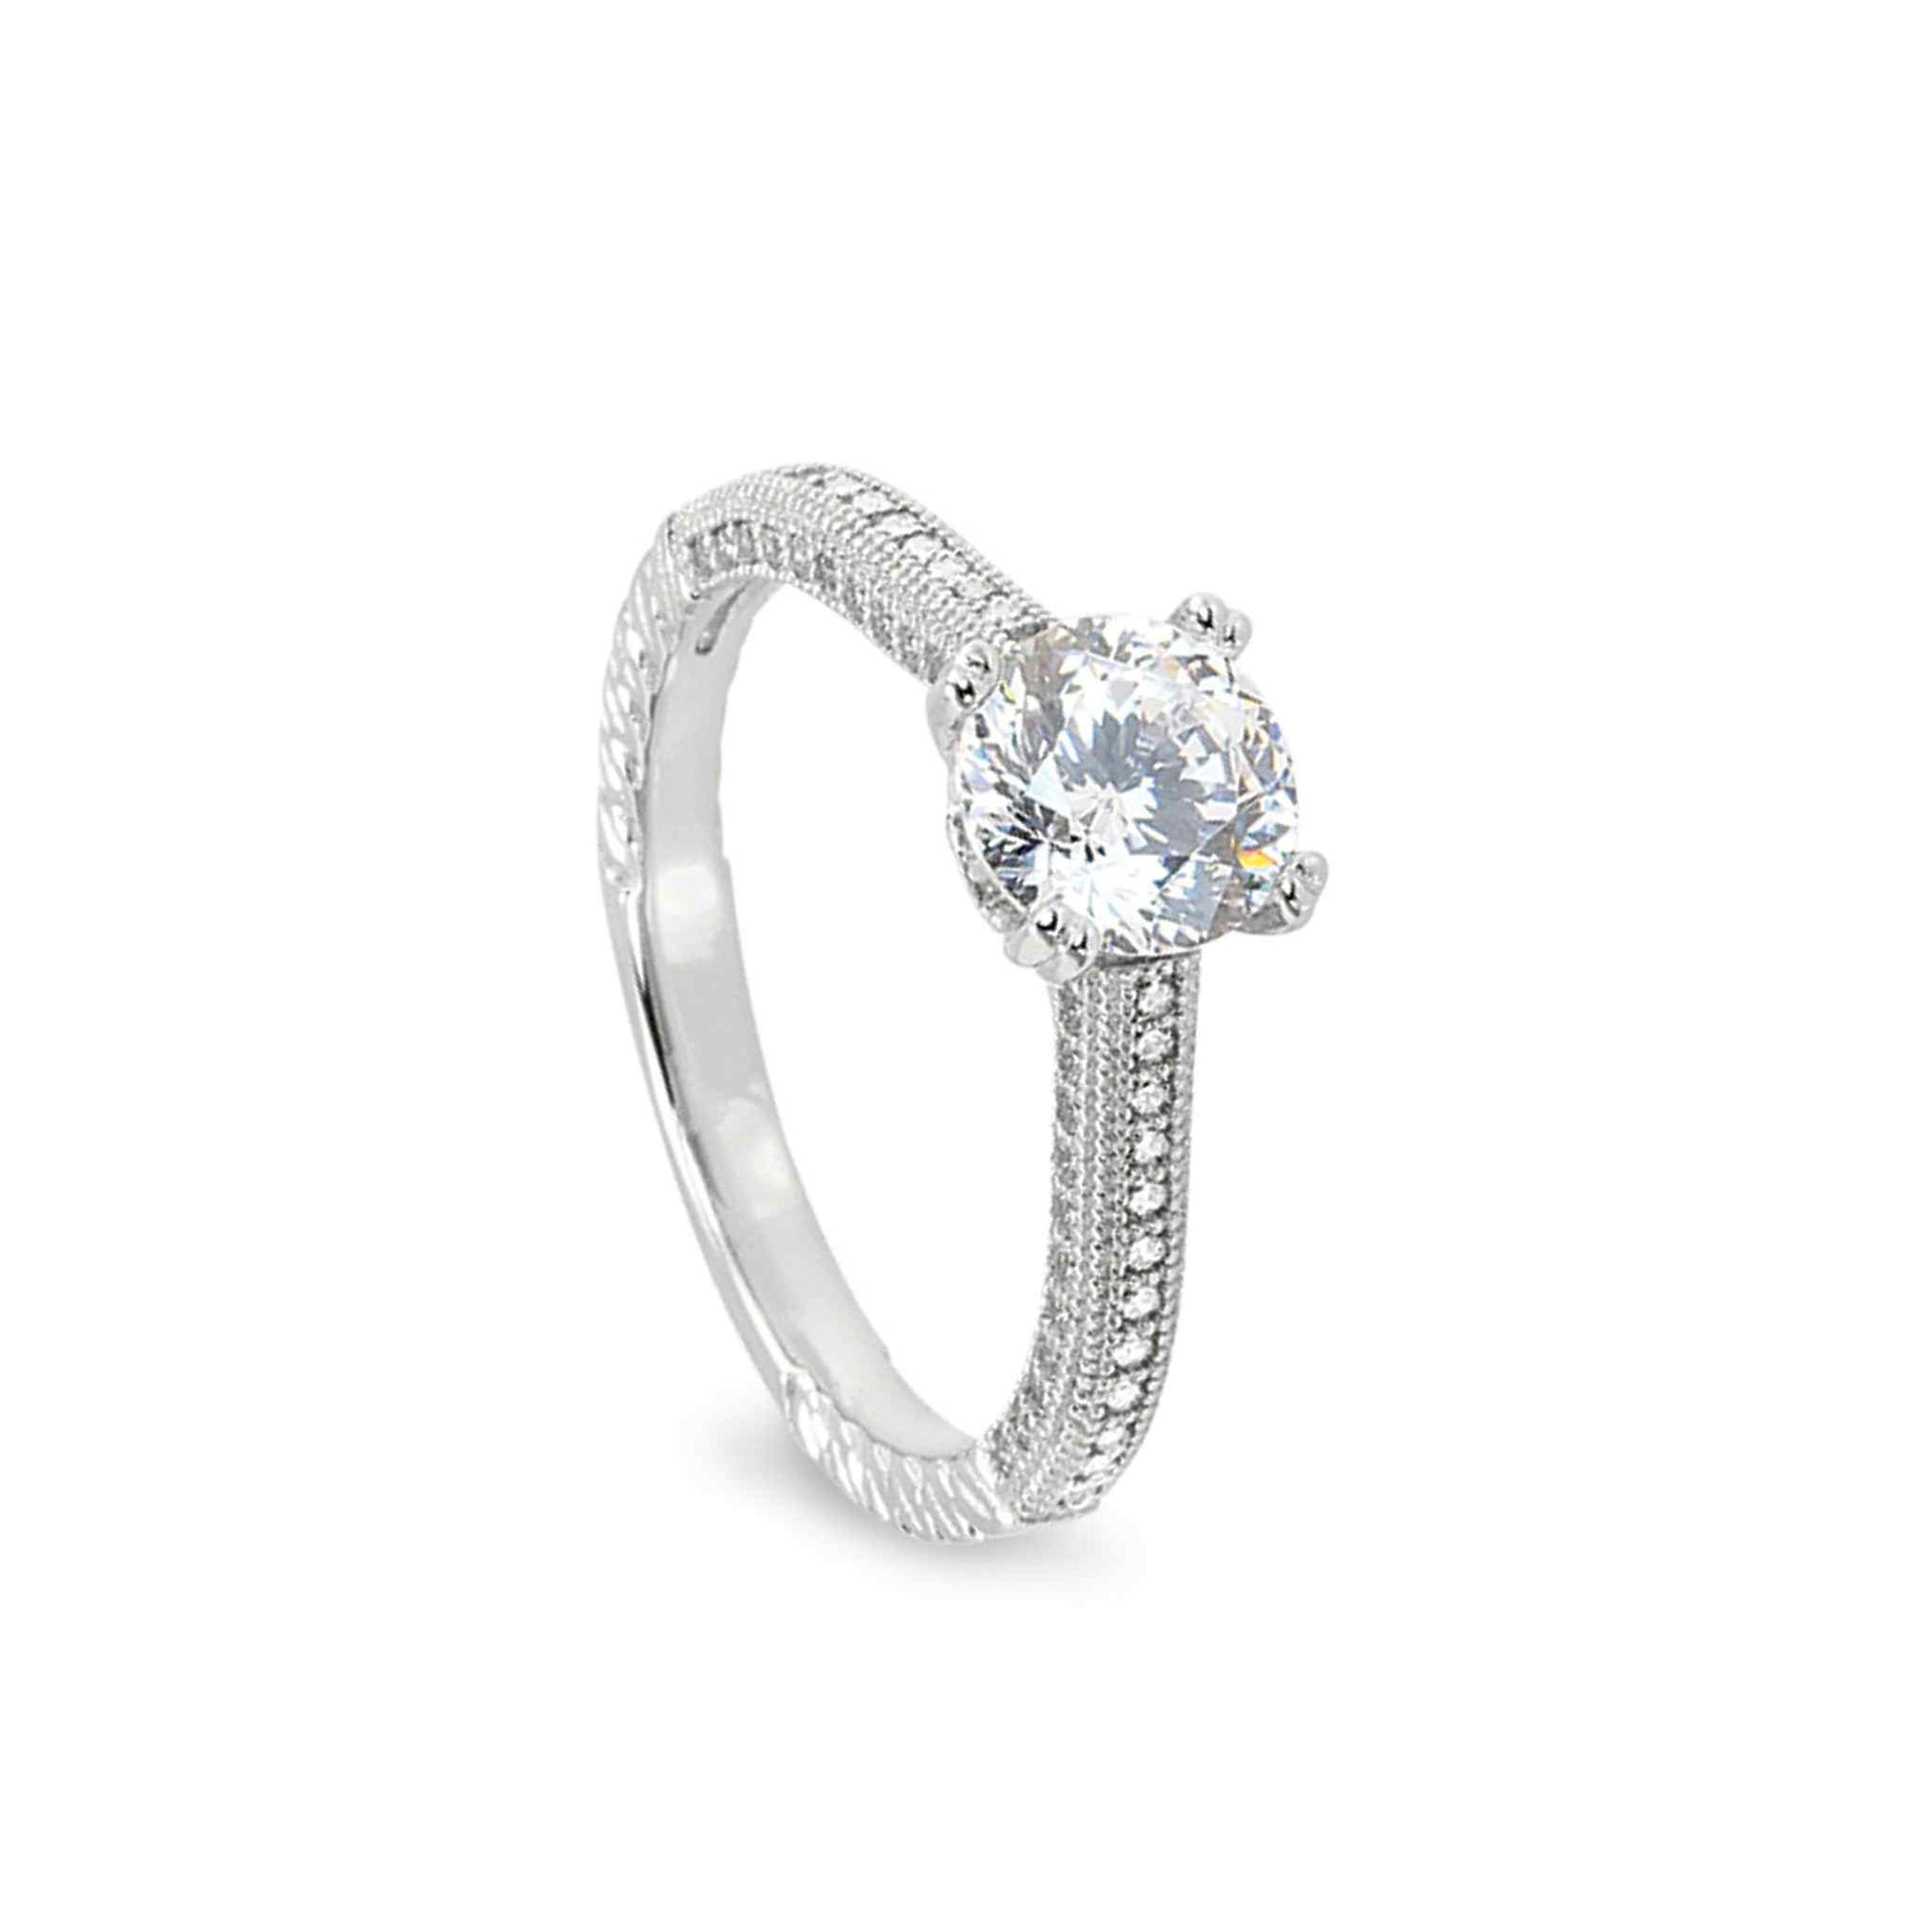 A vintage-style engagement ring with 100 facet simulated diamond displayed on a neutral white background.